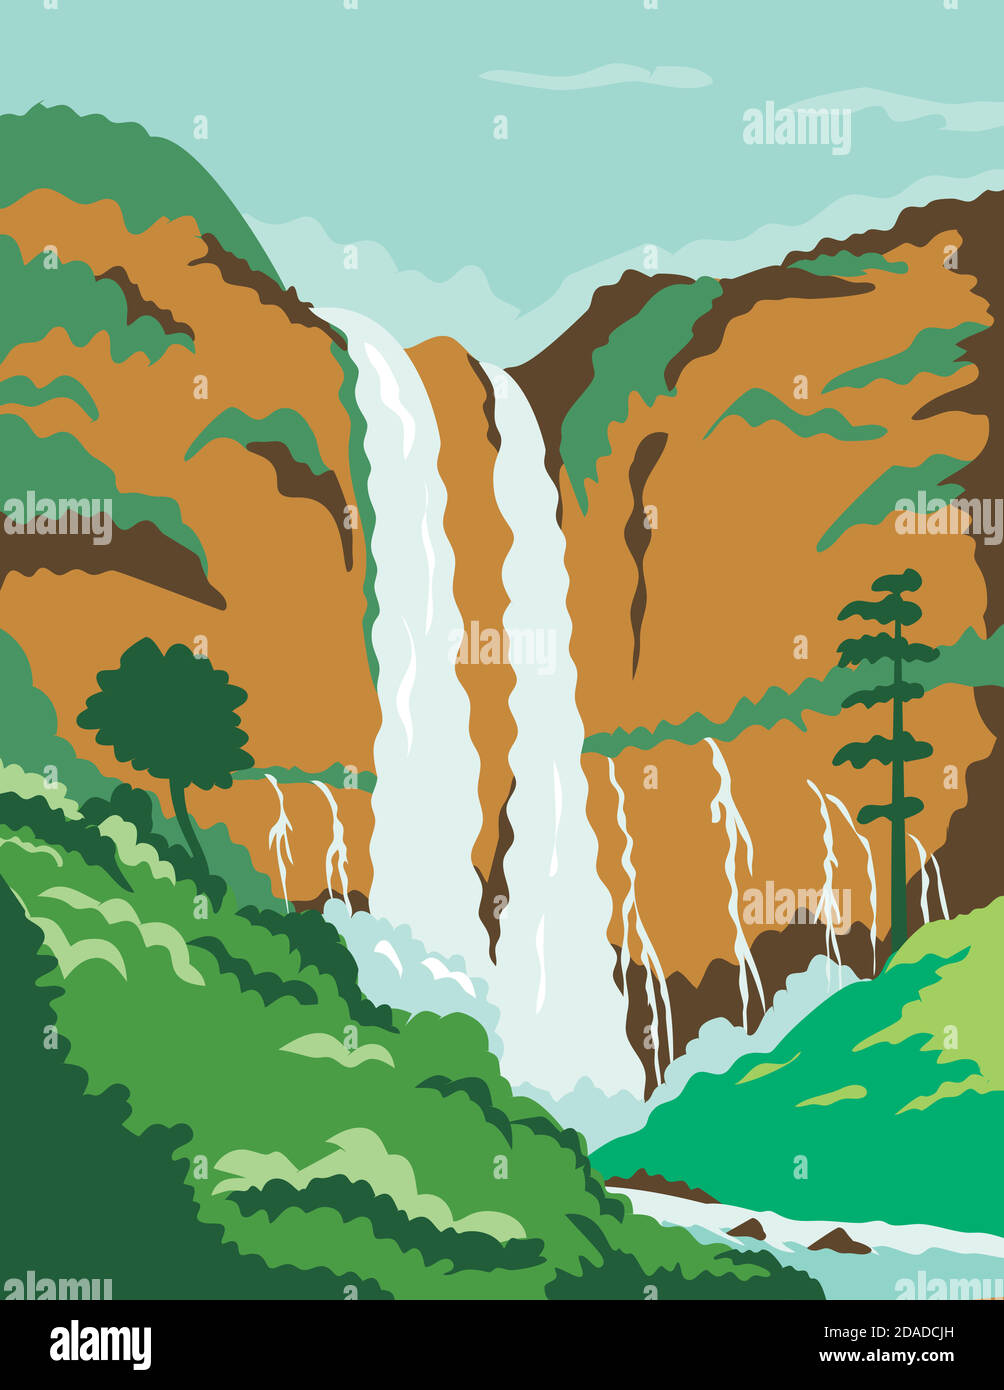 WPA poster art of the Maria Cristina Falls or twin falls, a waterfall of Agus River in Northern Mindanao region of the Philippines done in works proje Stock Vector